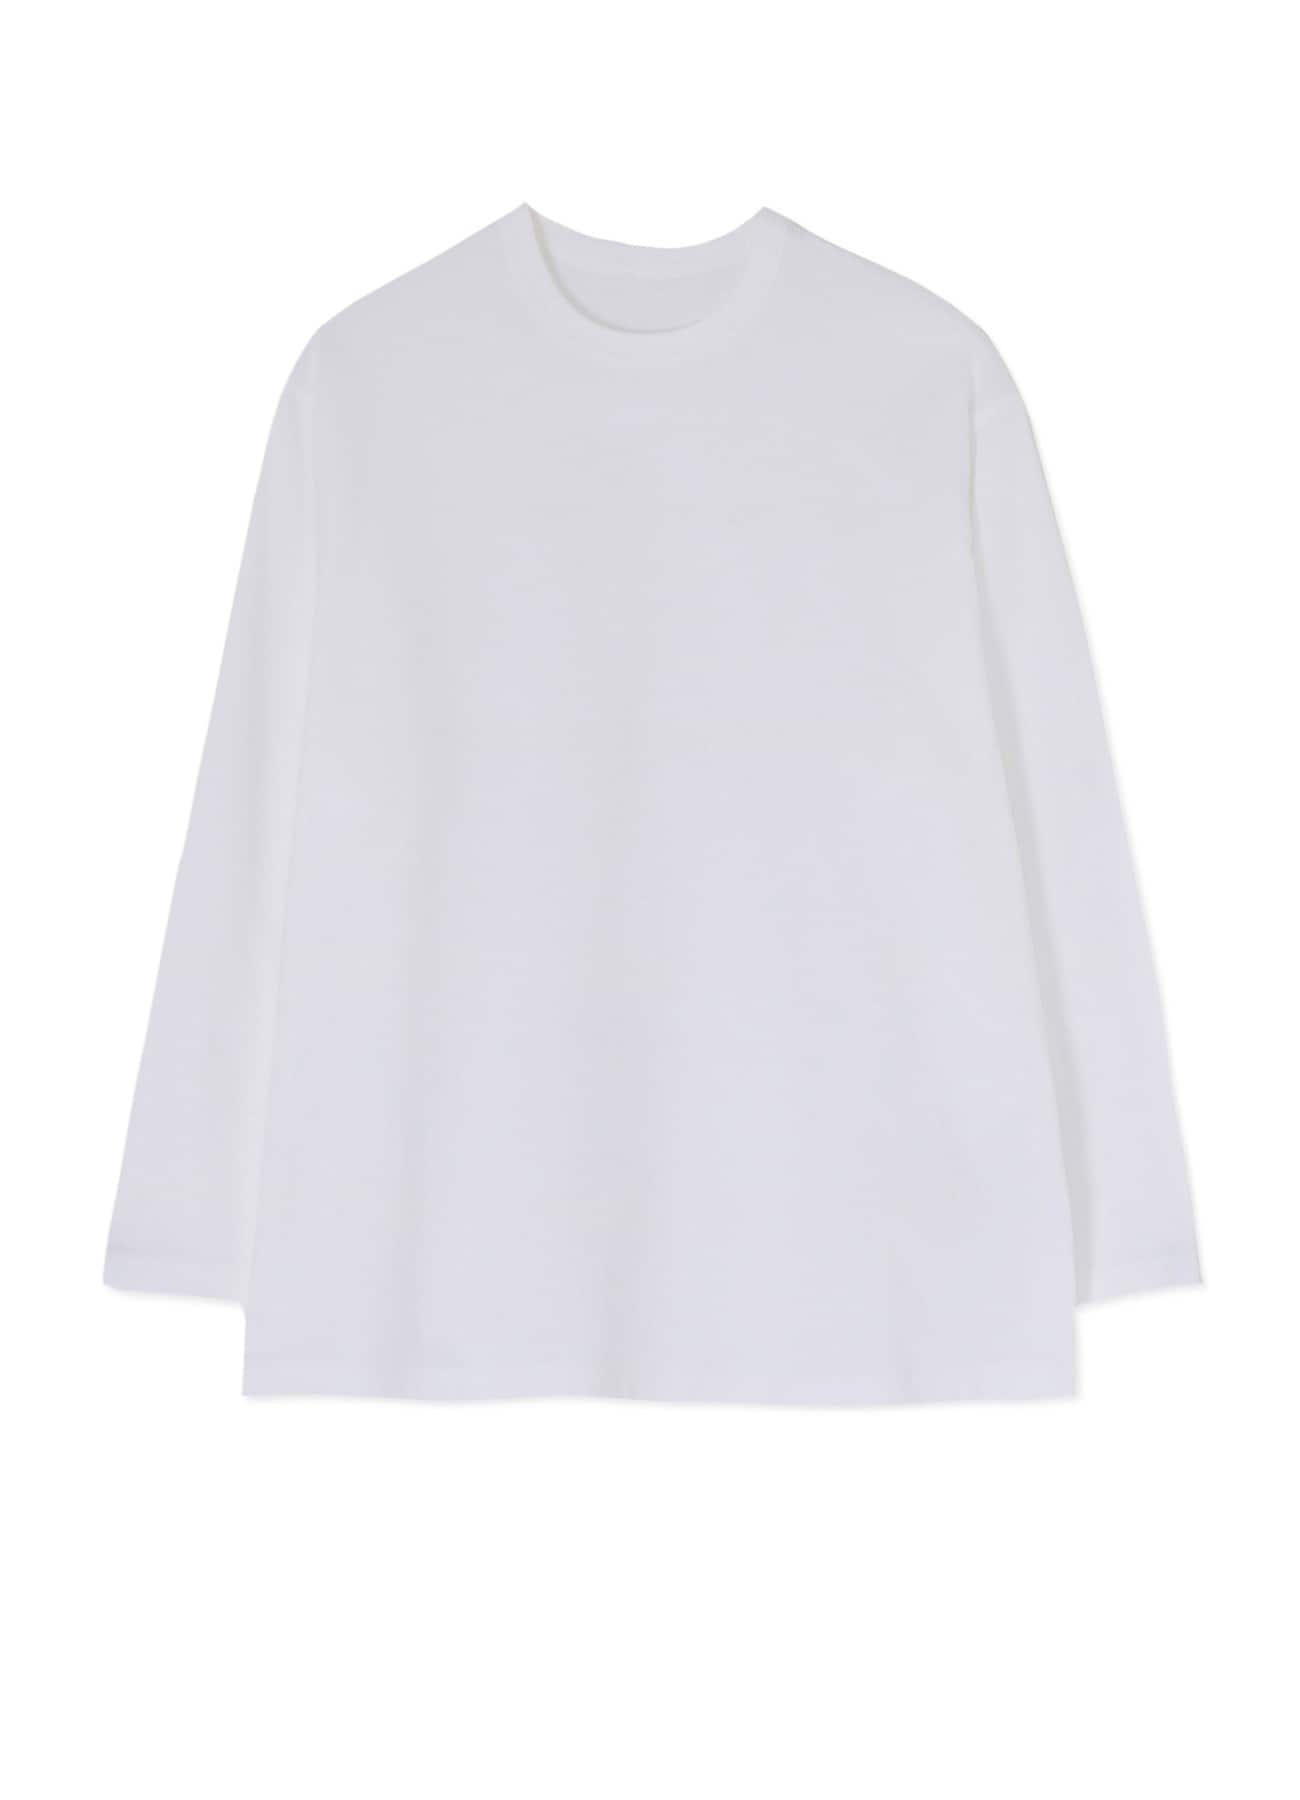 40/2 COTTON JERSEY LONG SLEEVE SHIRT (M)(M White): Y's for 